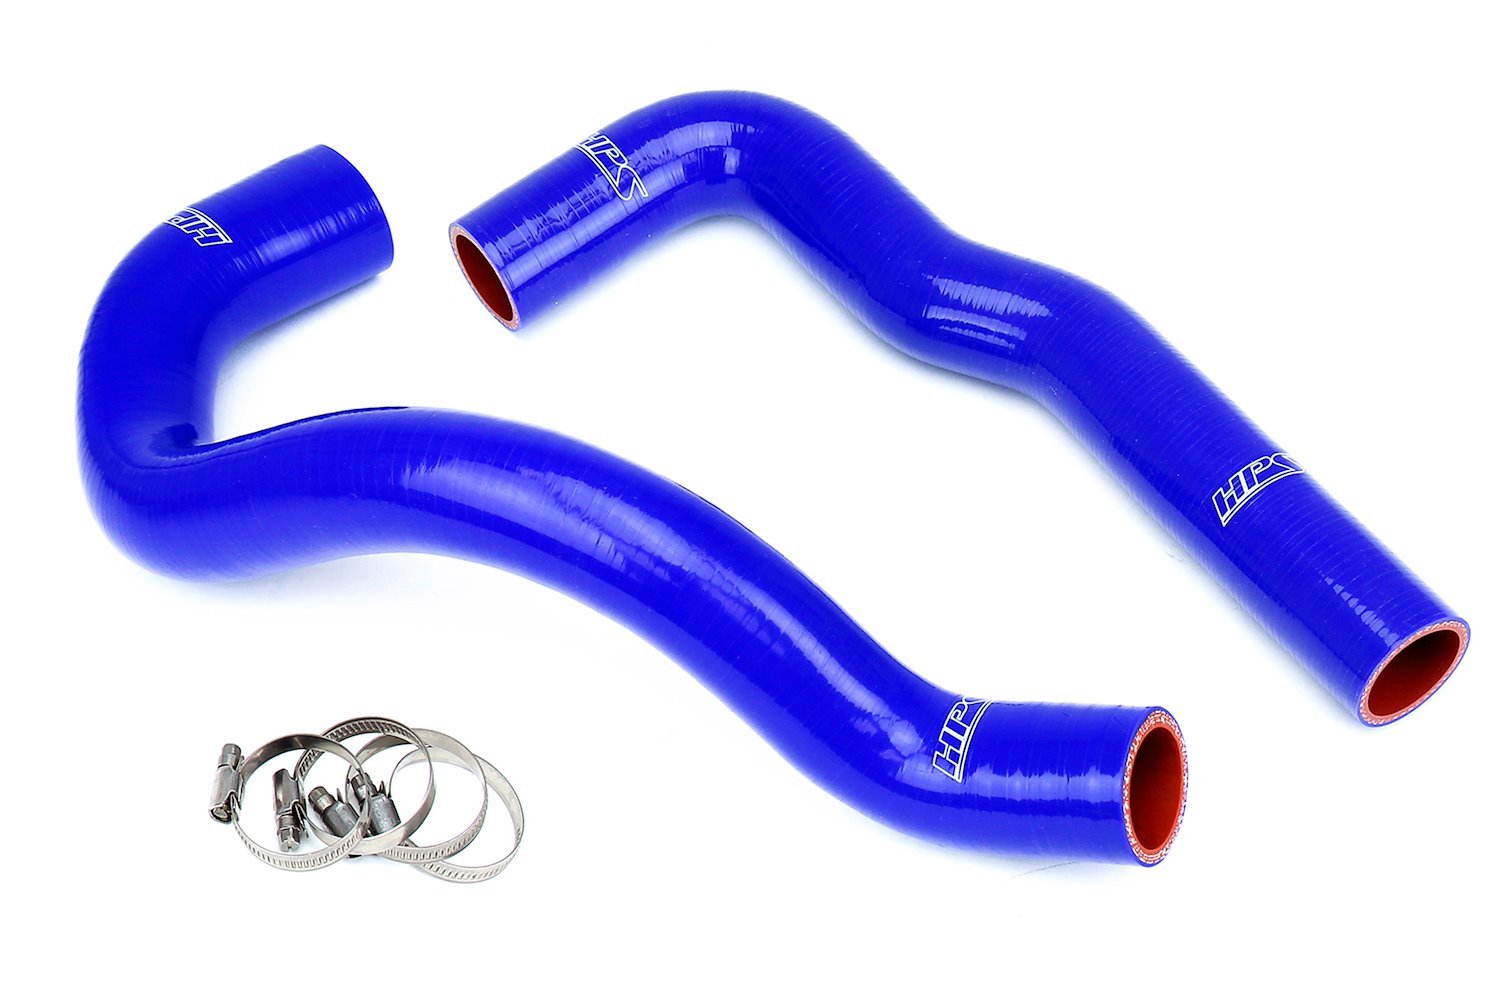 57-2066-BLUE Radiator Hose Kit, 3-Ply Reinforced Silicone, Replaces Rubber Radiator Coolant Hoses